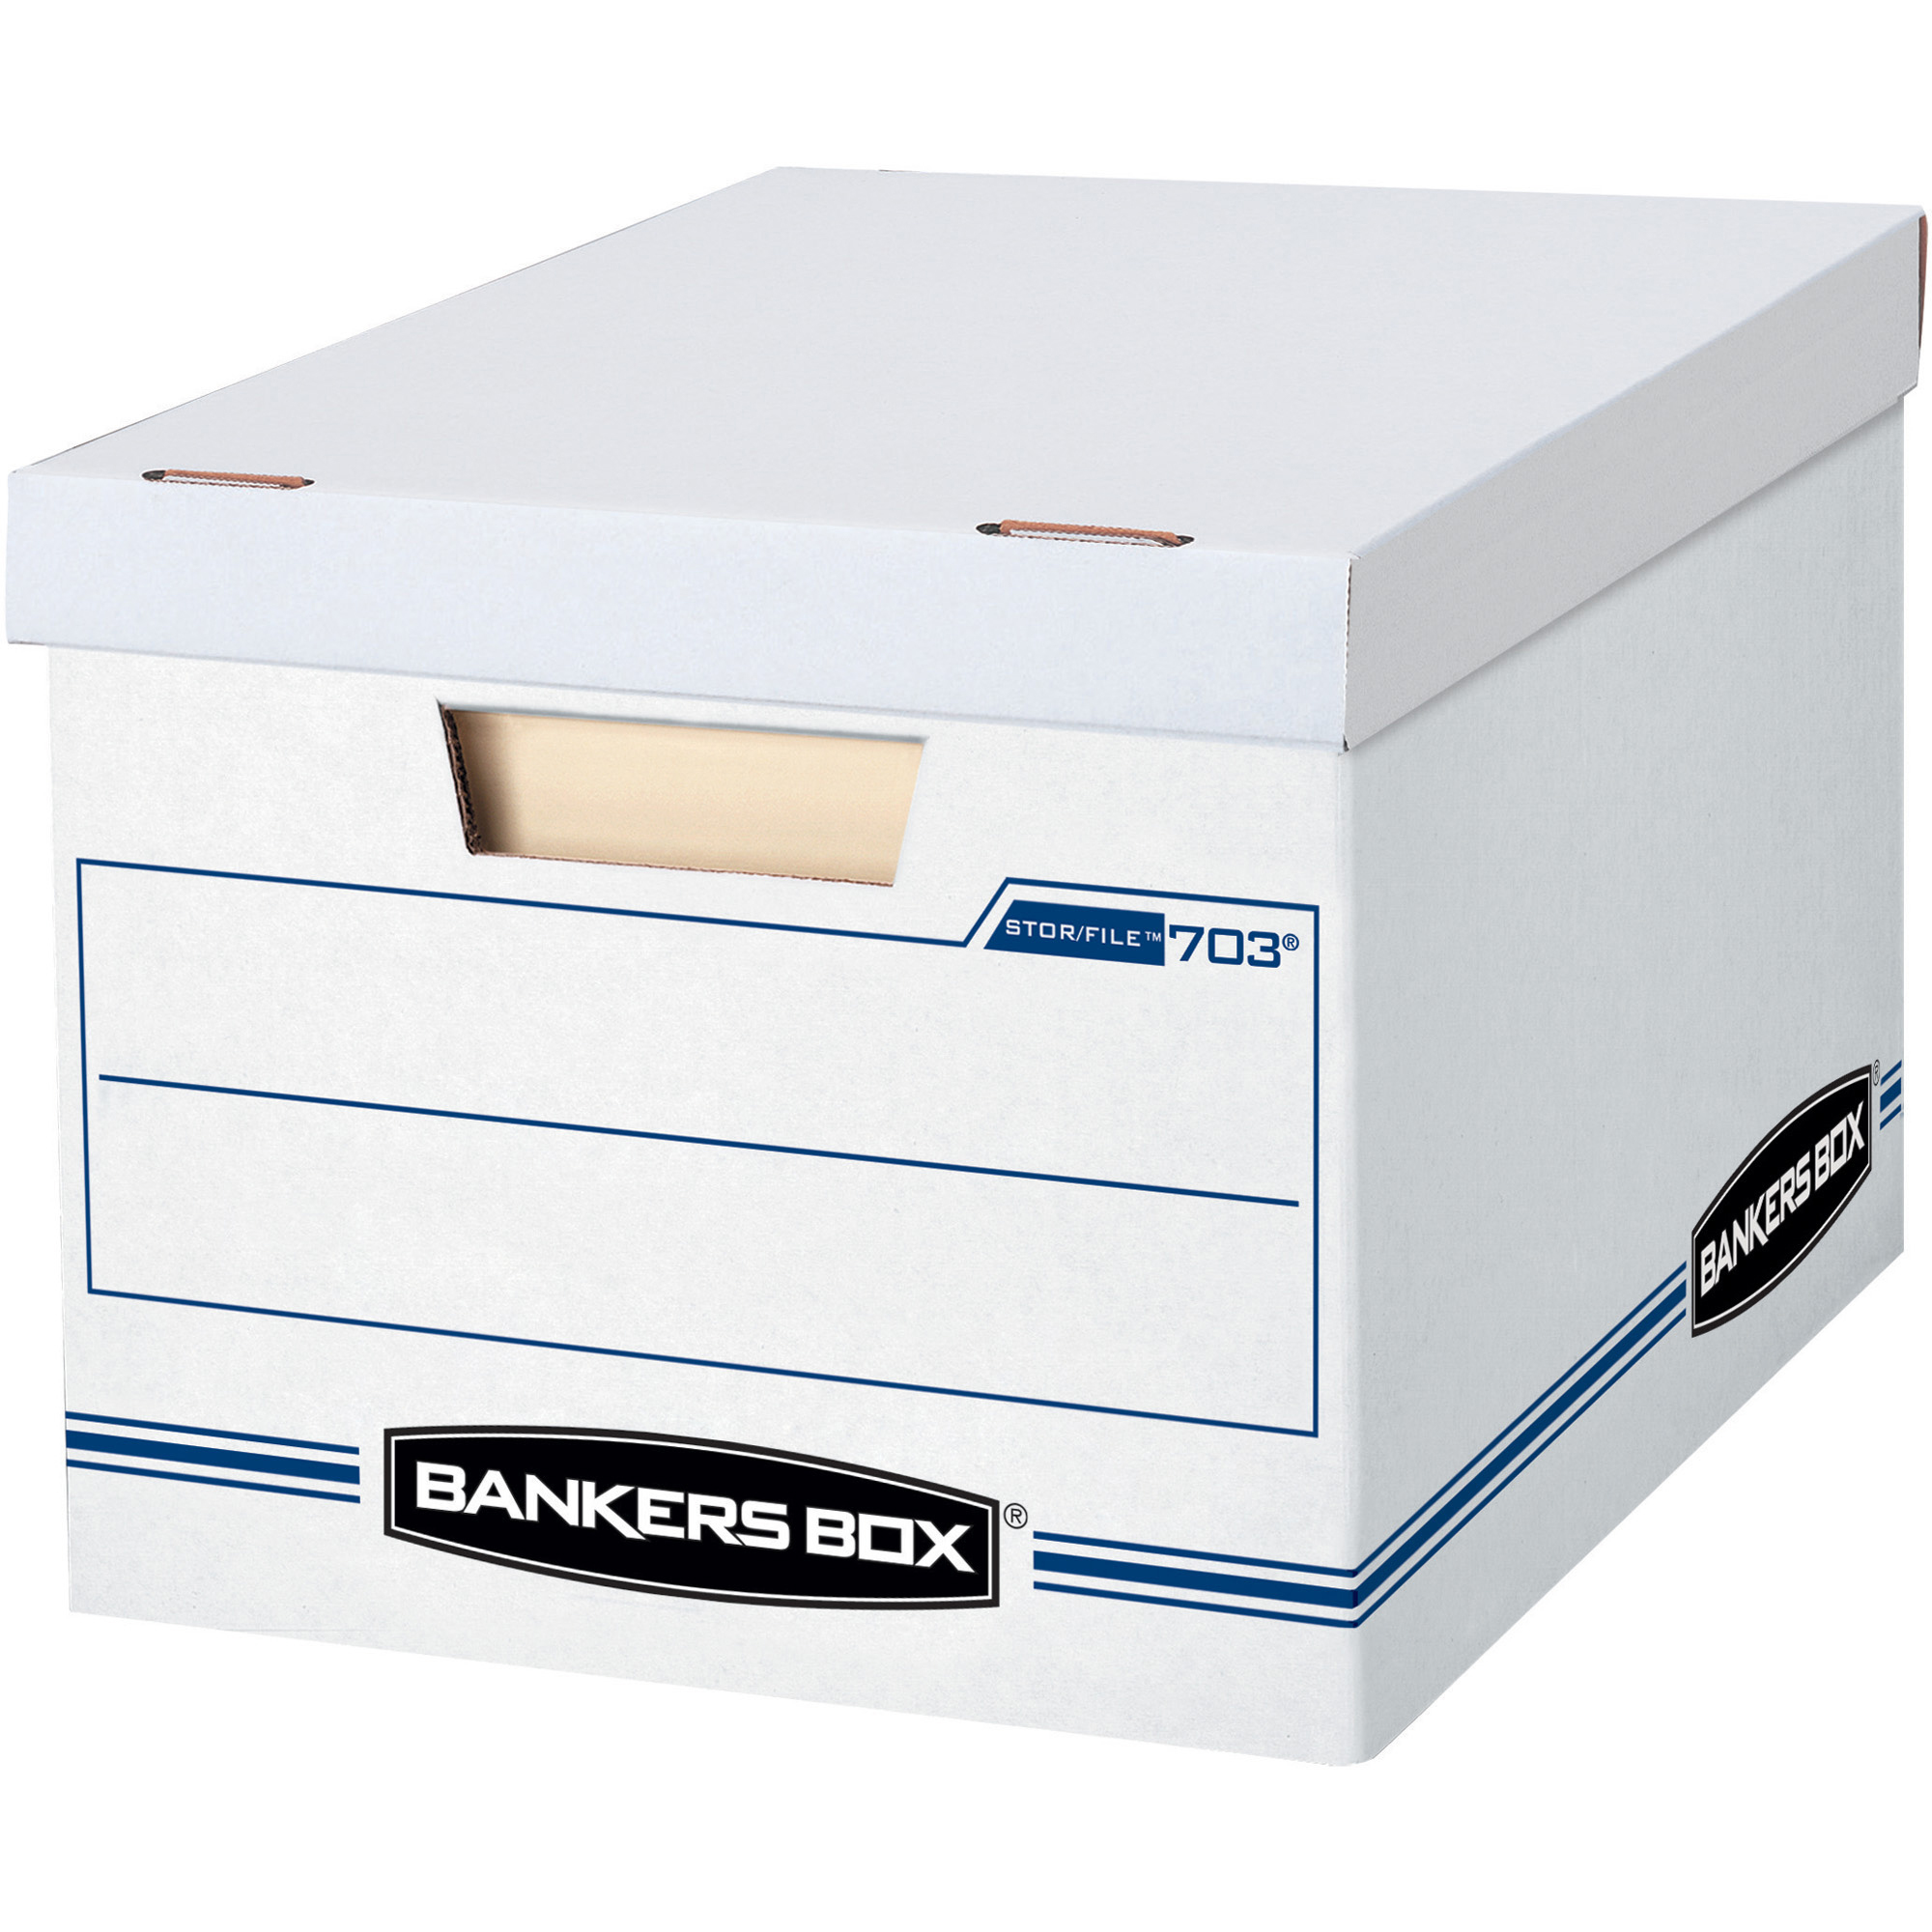 Bankers Box Storfile File Storage Box Storage Boxes And Containers